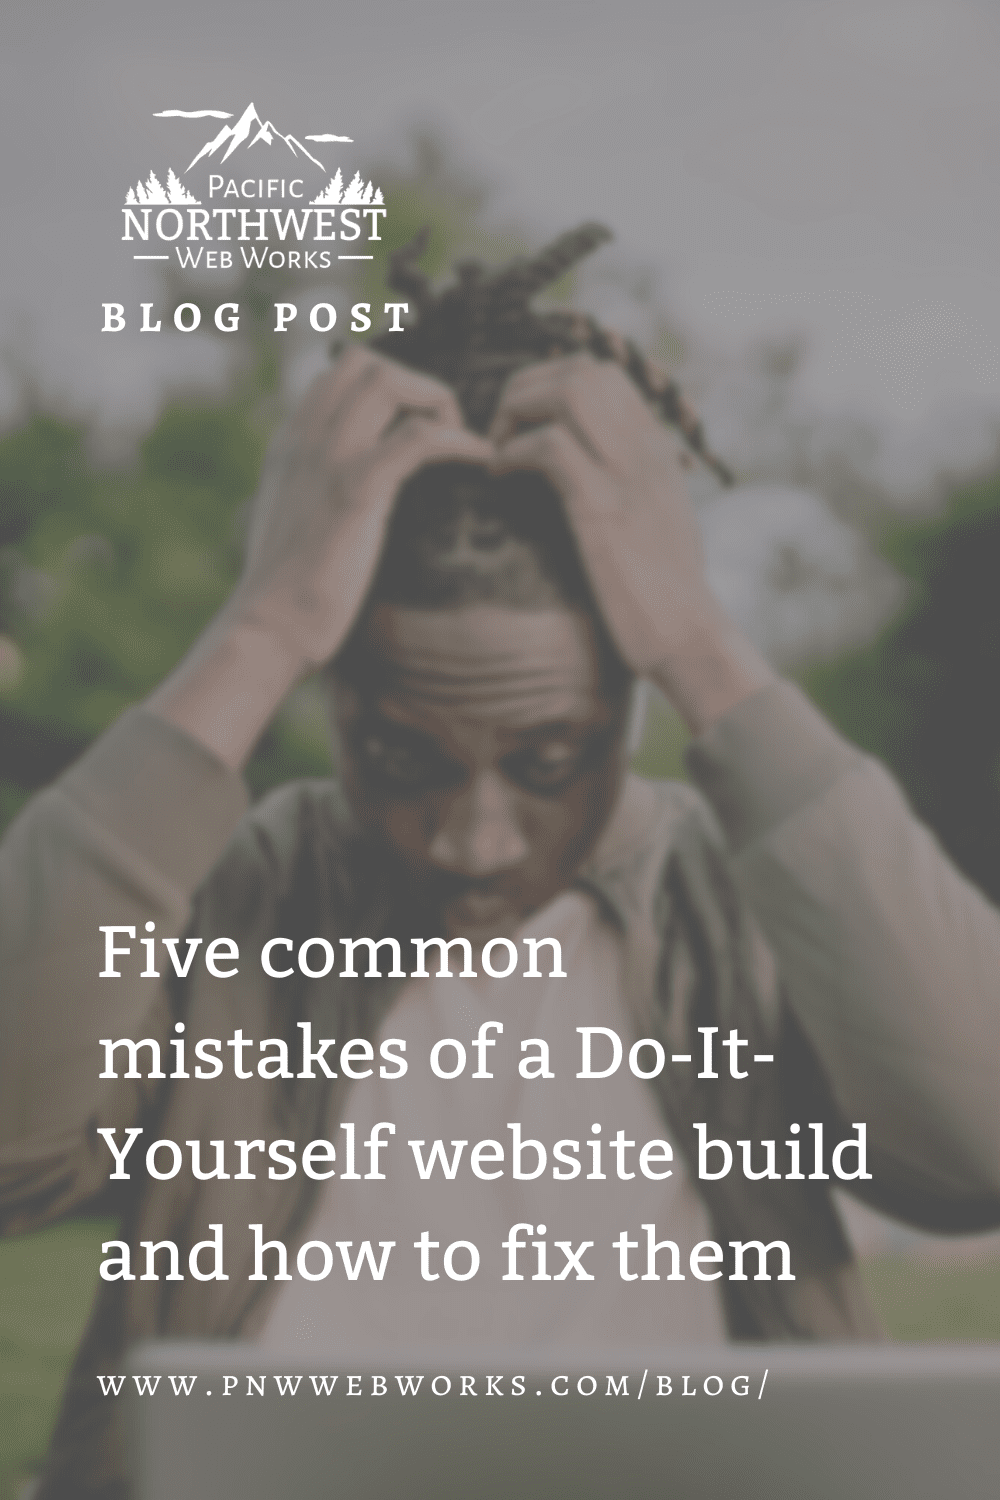 Five common mistakes of a Do-It-Yourself website build and how to fix them